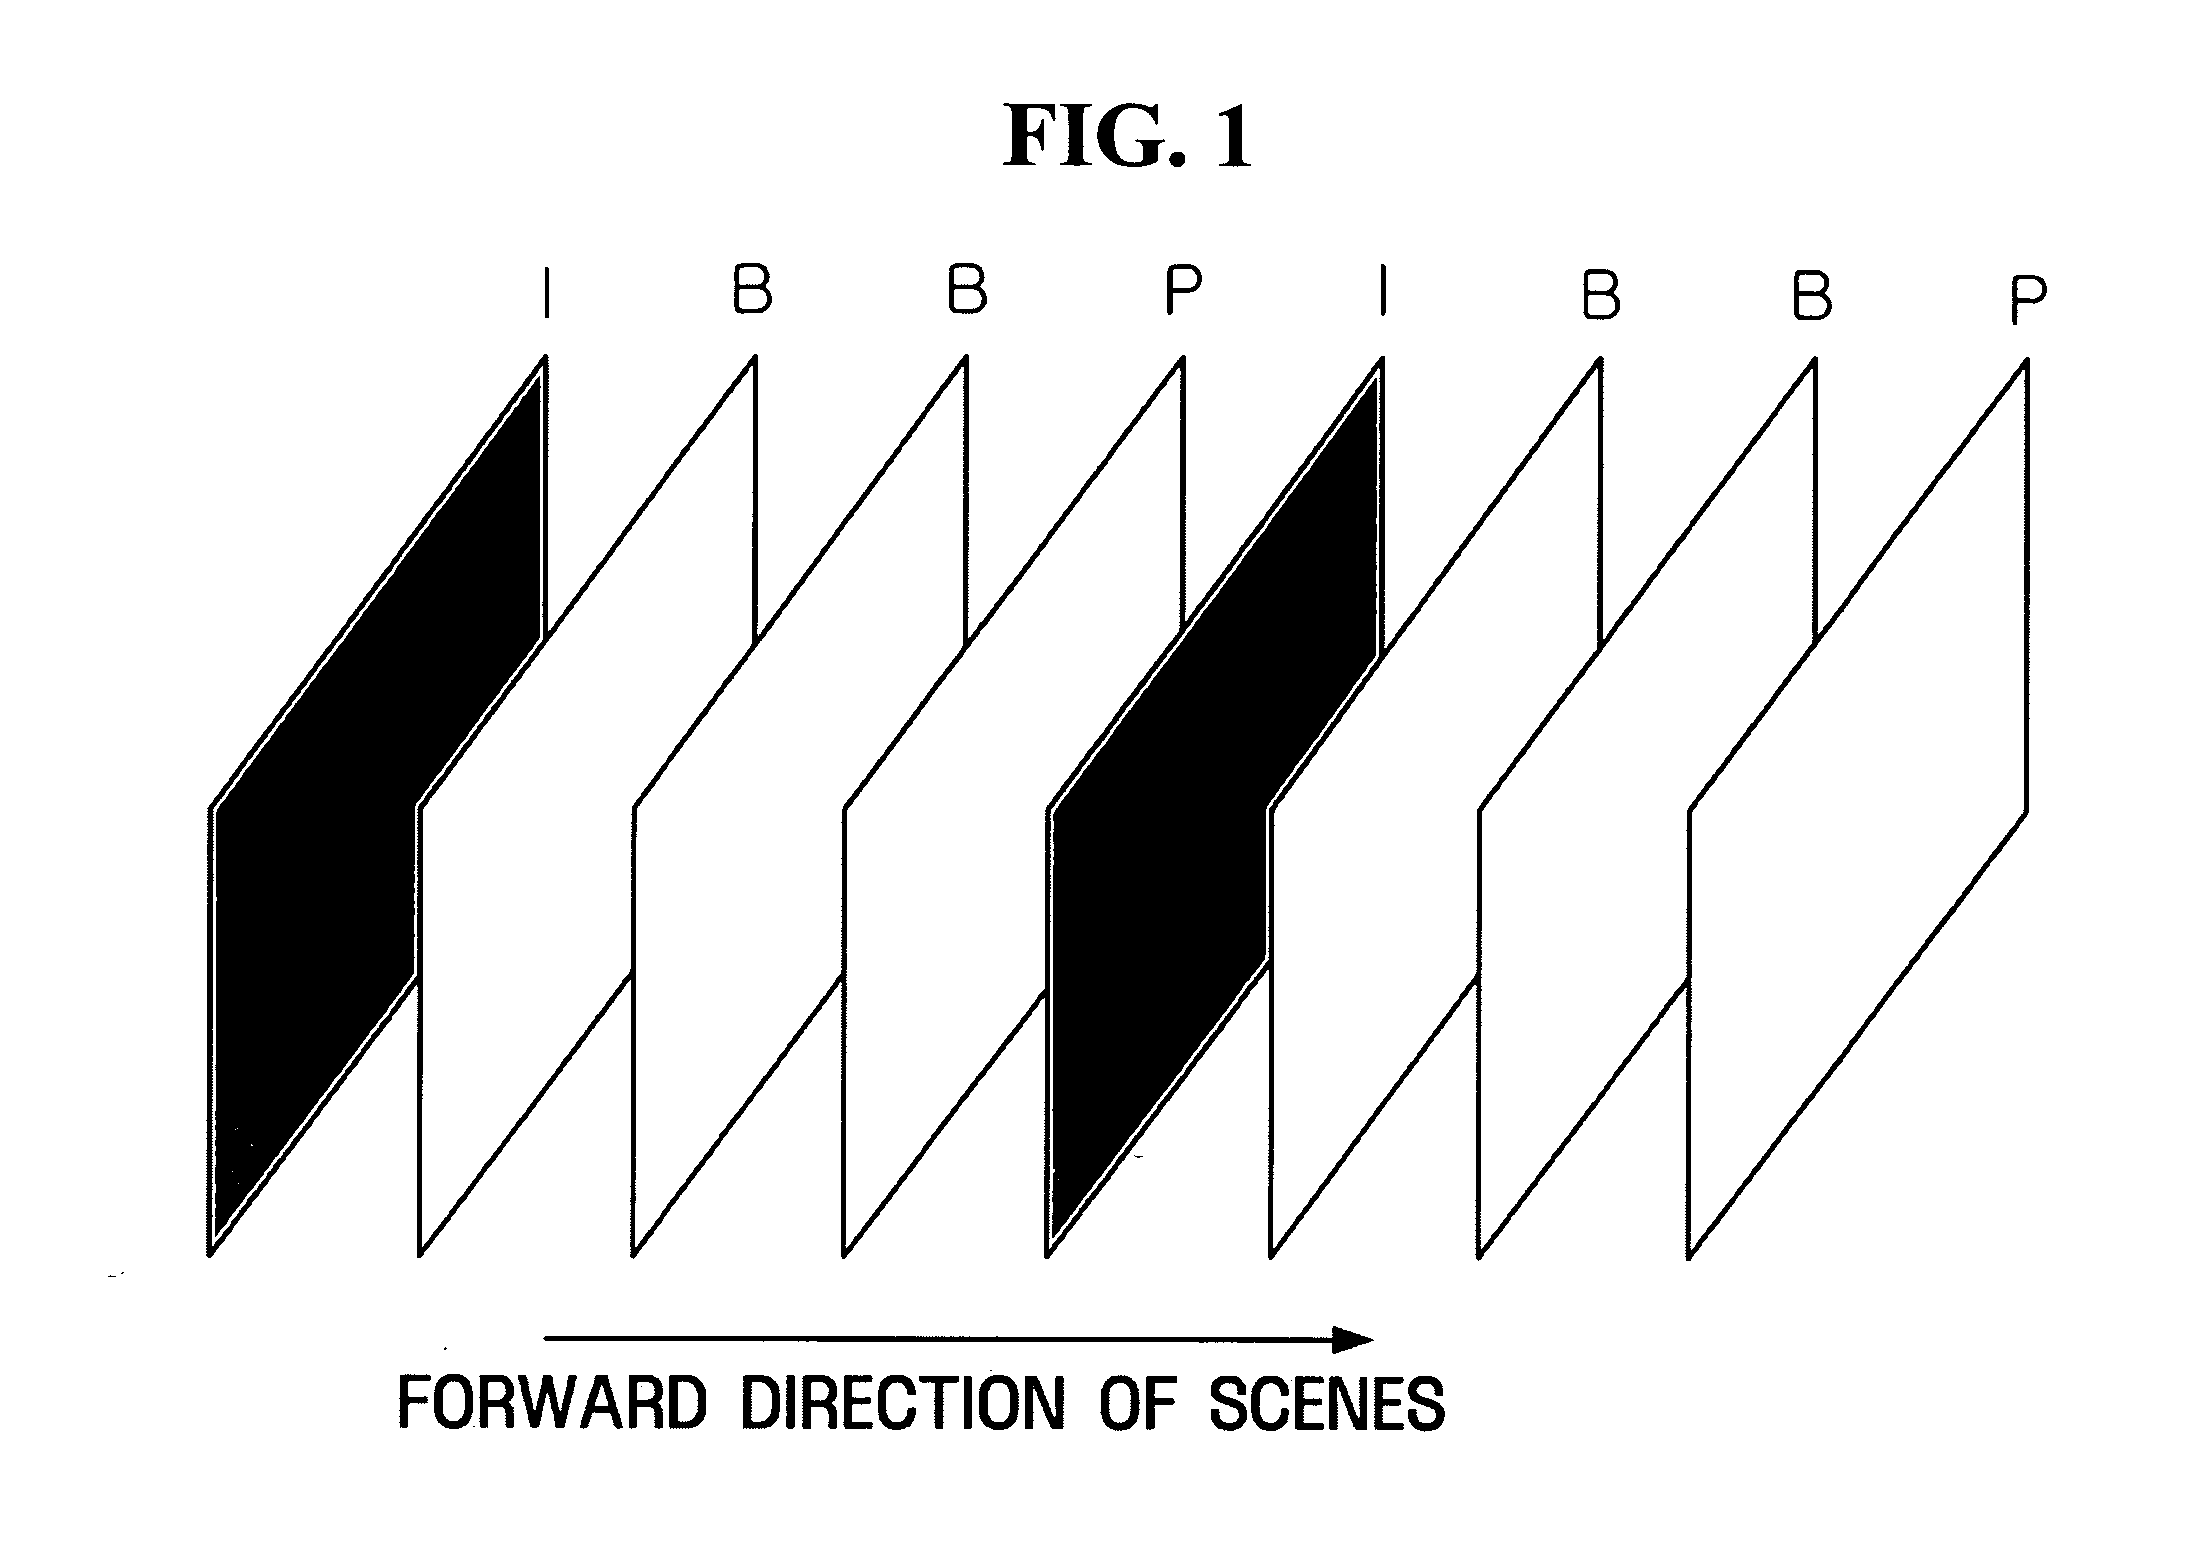 Video coding apparatus and method for inserting key frame adaptively